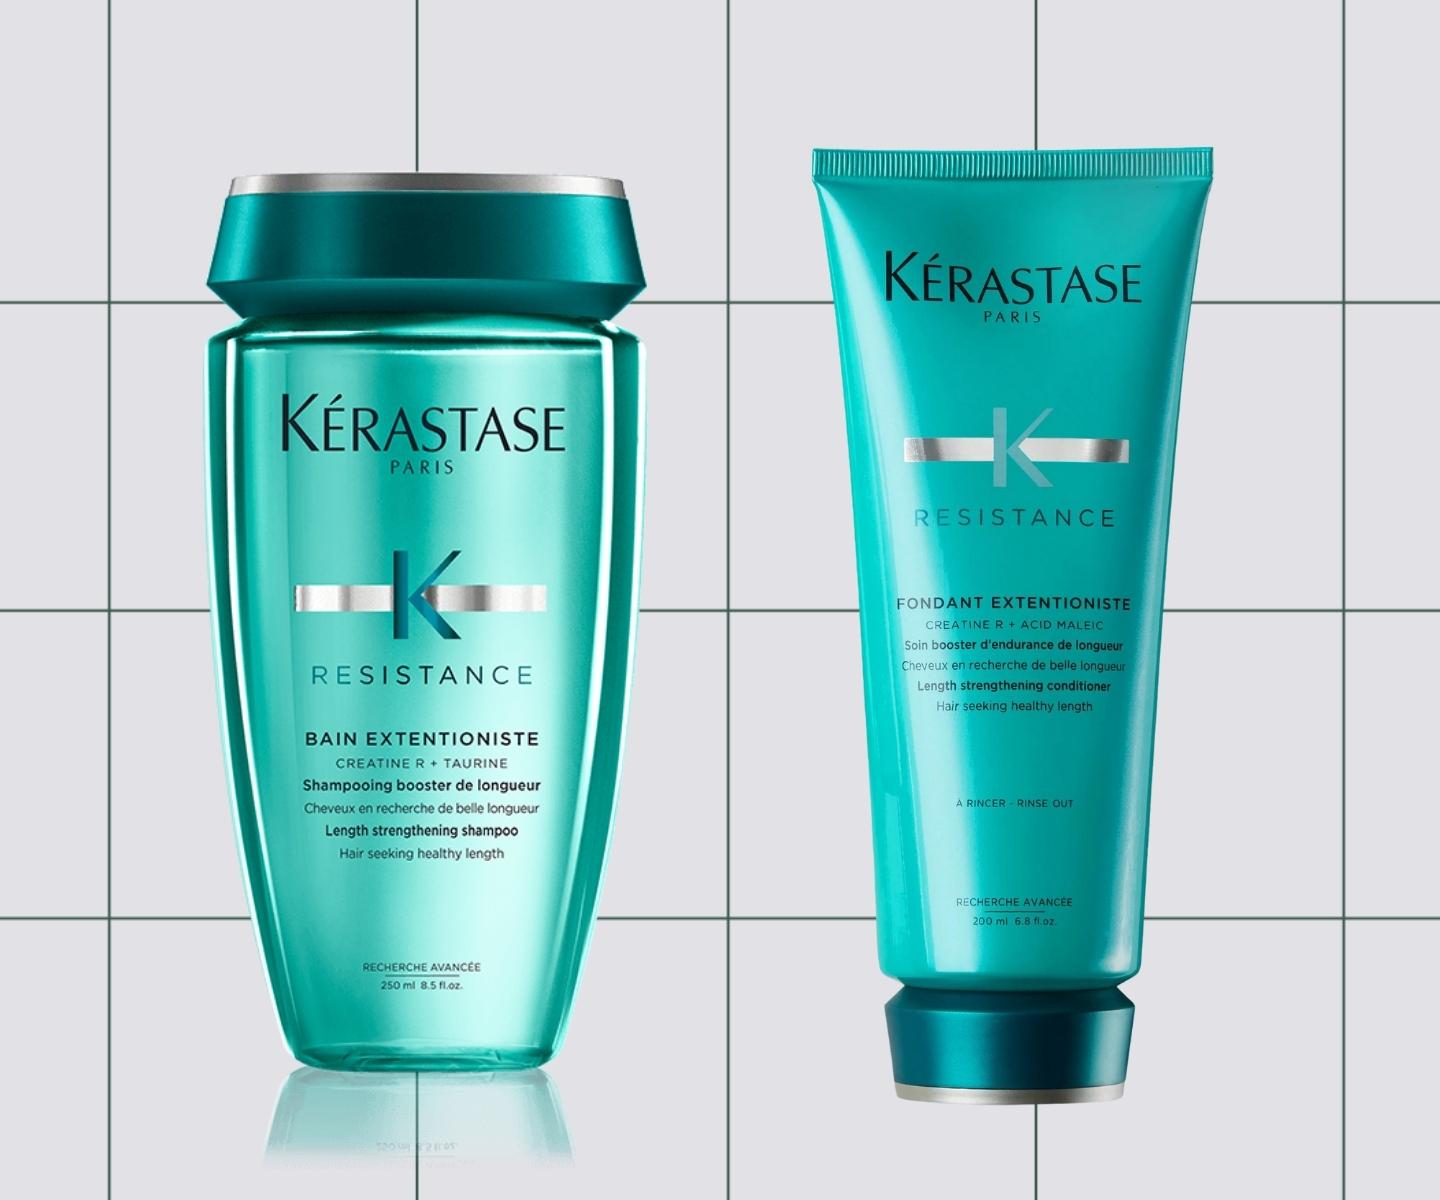 shabby hastighed fordrejer The Top 10 Best-Selling Kérastase Hair Products on Adore Beauty Right Now